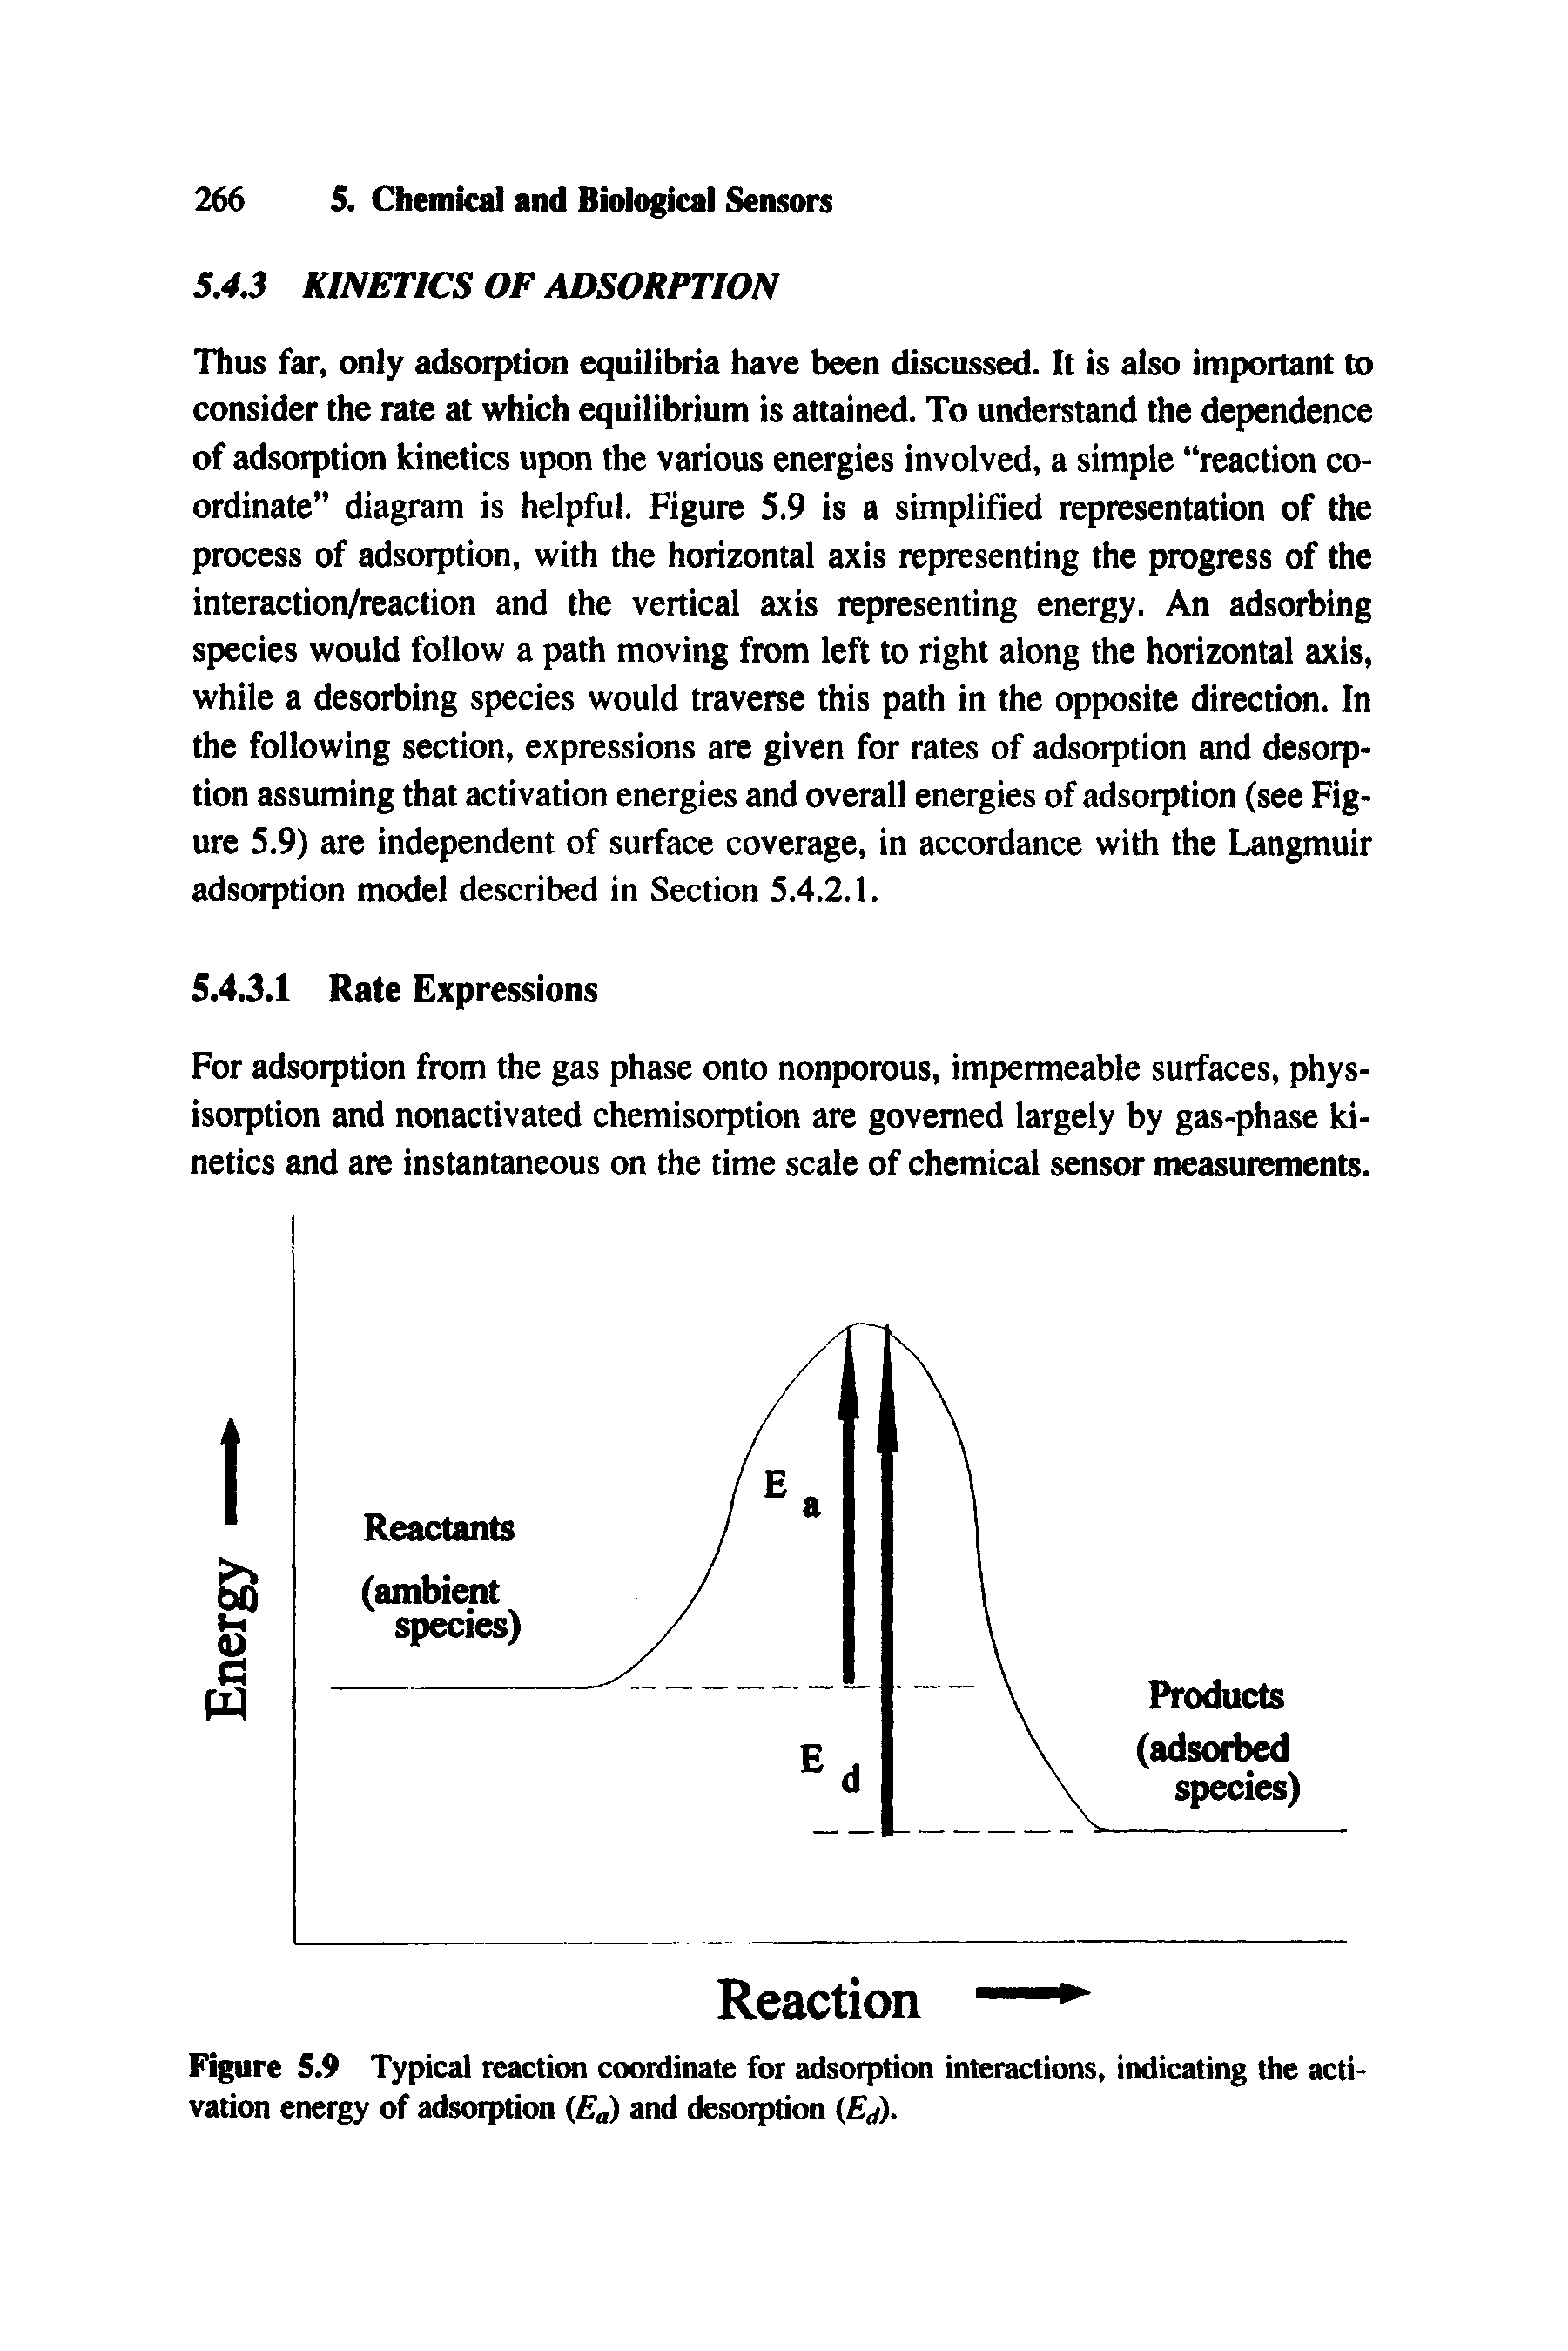 Figure 5.9 Typical reaction coordinate for adsorption interactions, indicating the activation energy of adsorption ) and desrnption (Ej).